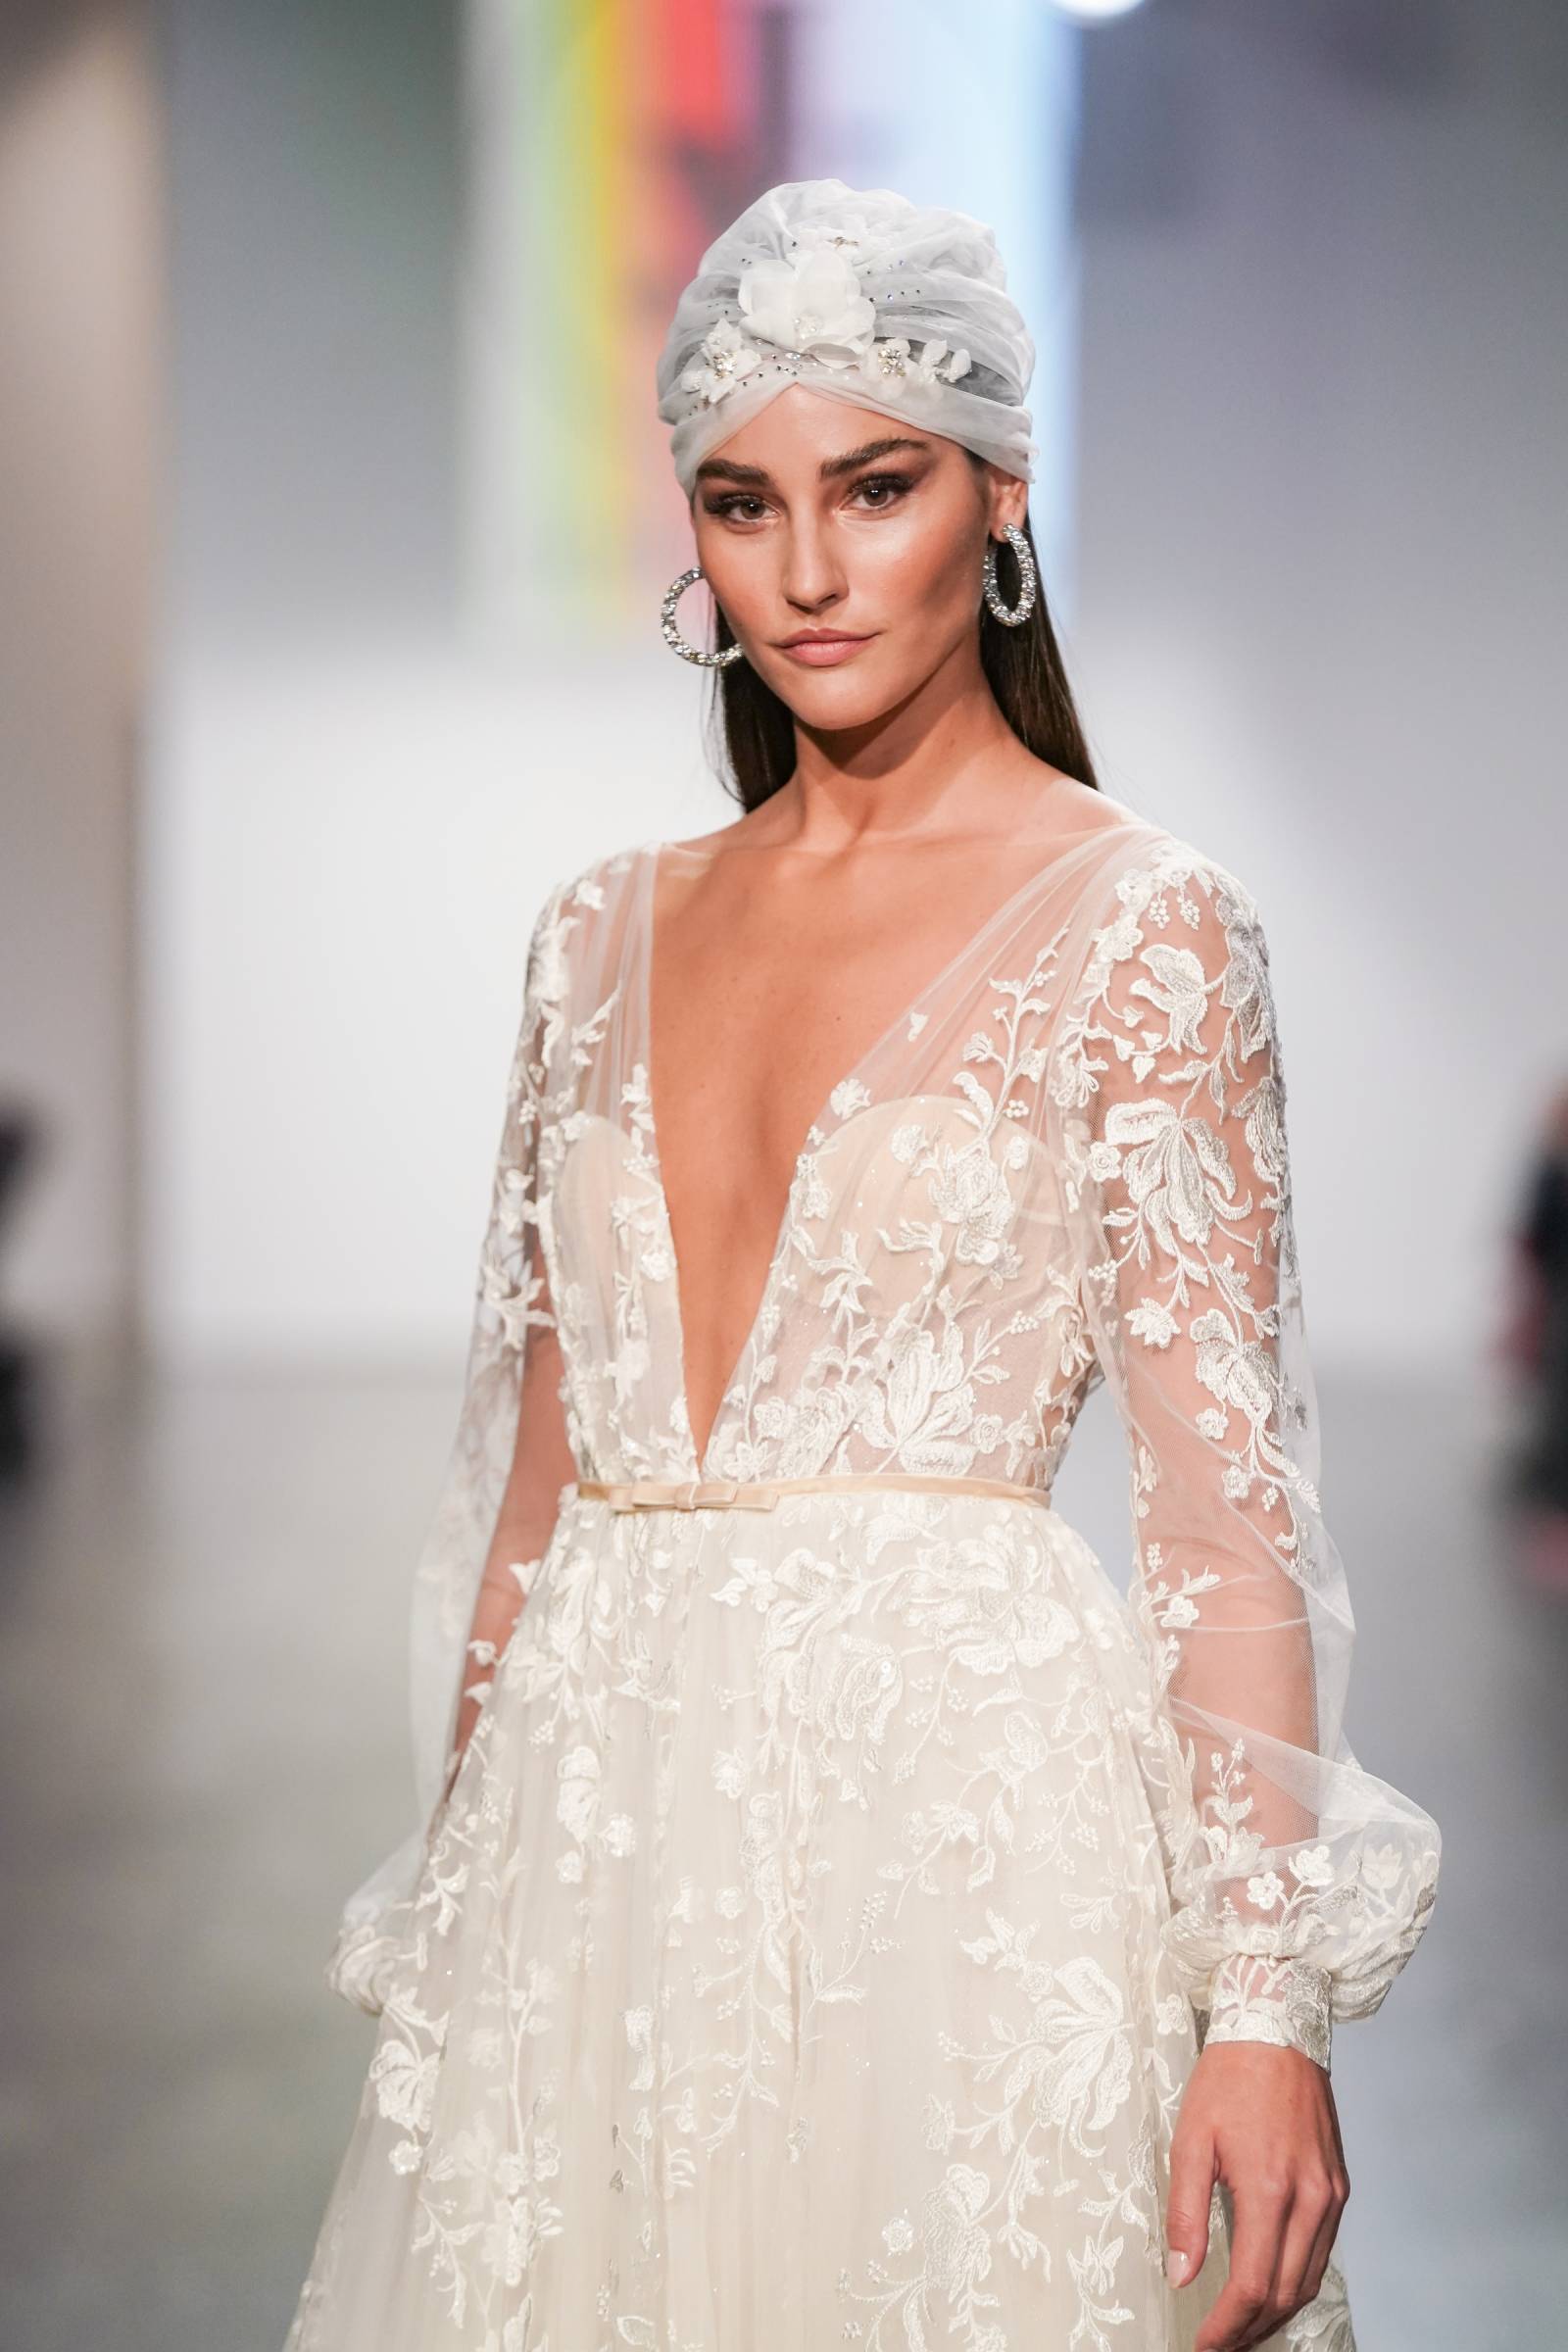 Wedding Dress Trends for Fall 2020 from New York Bridal Fashion Week